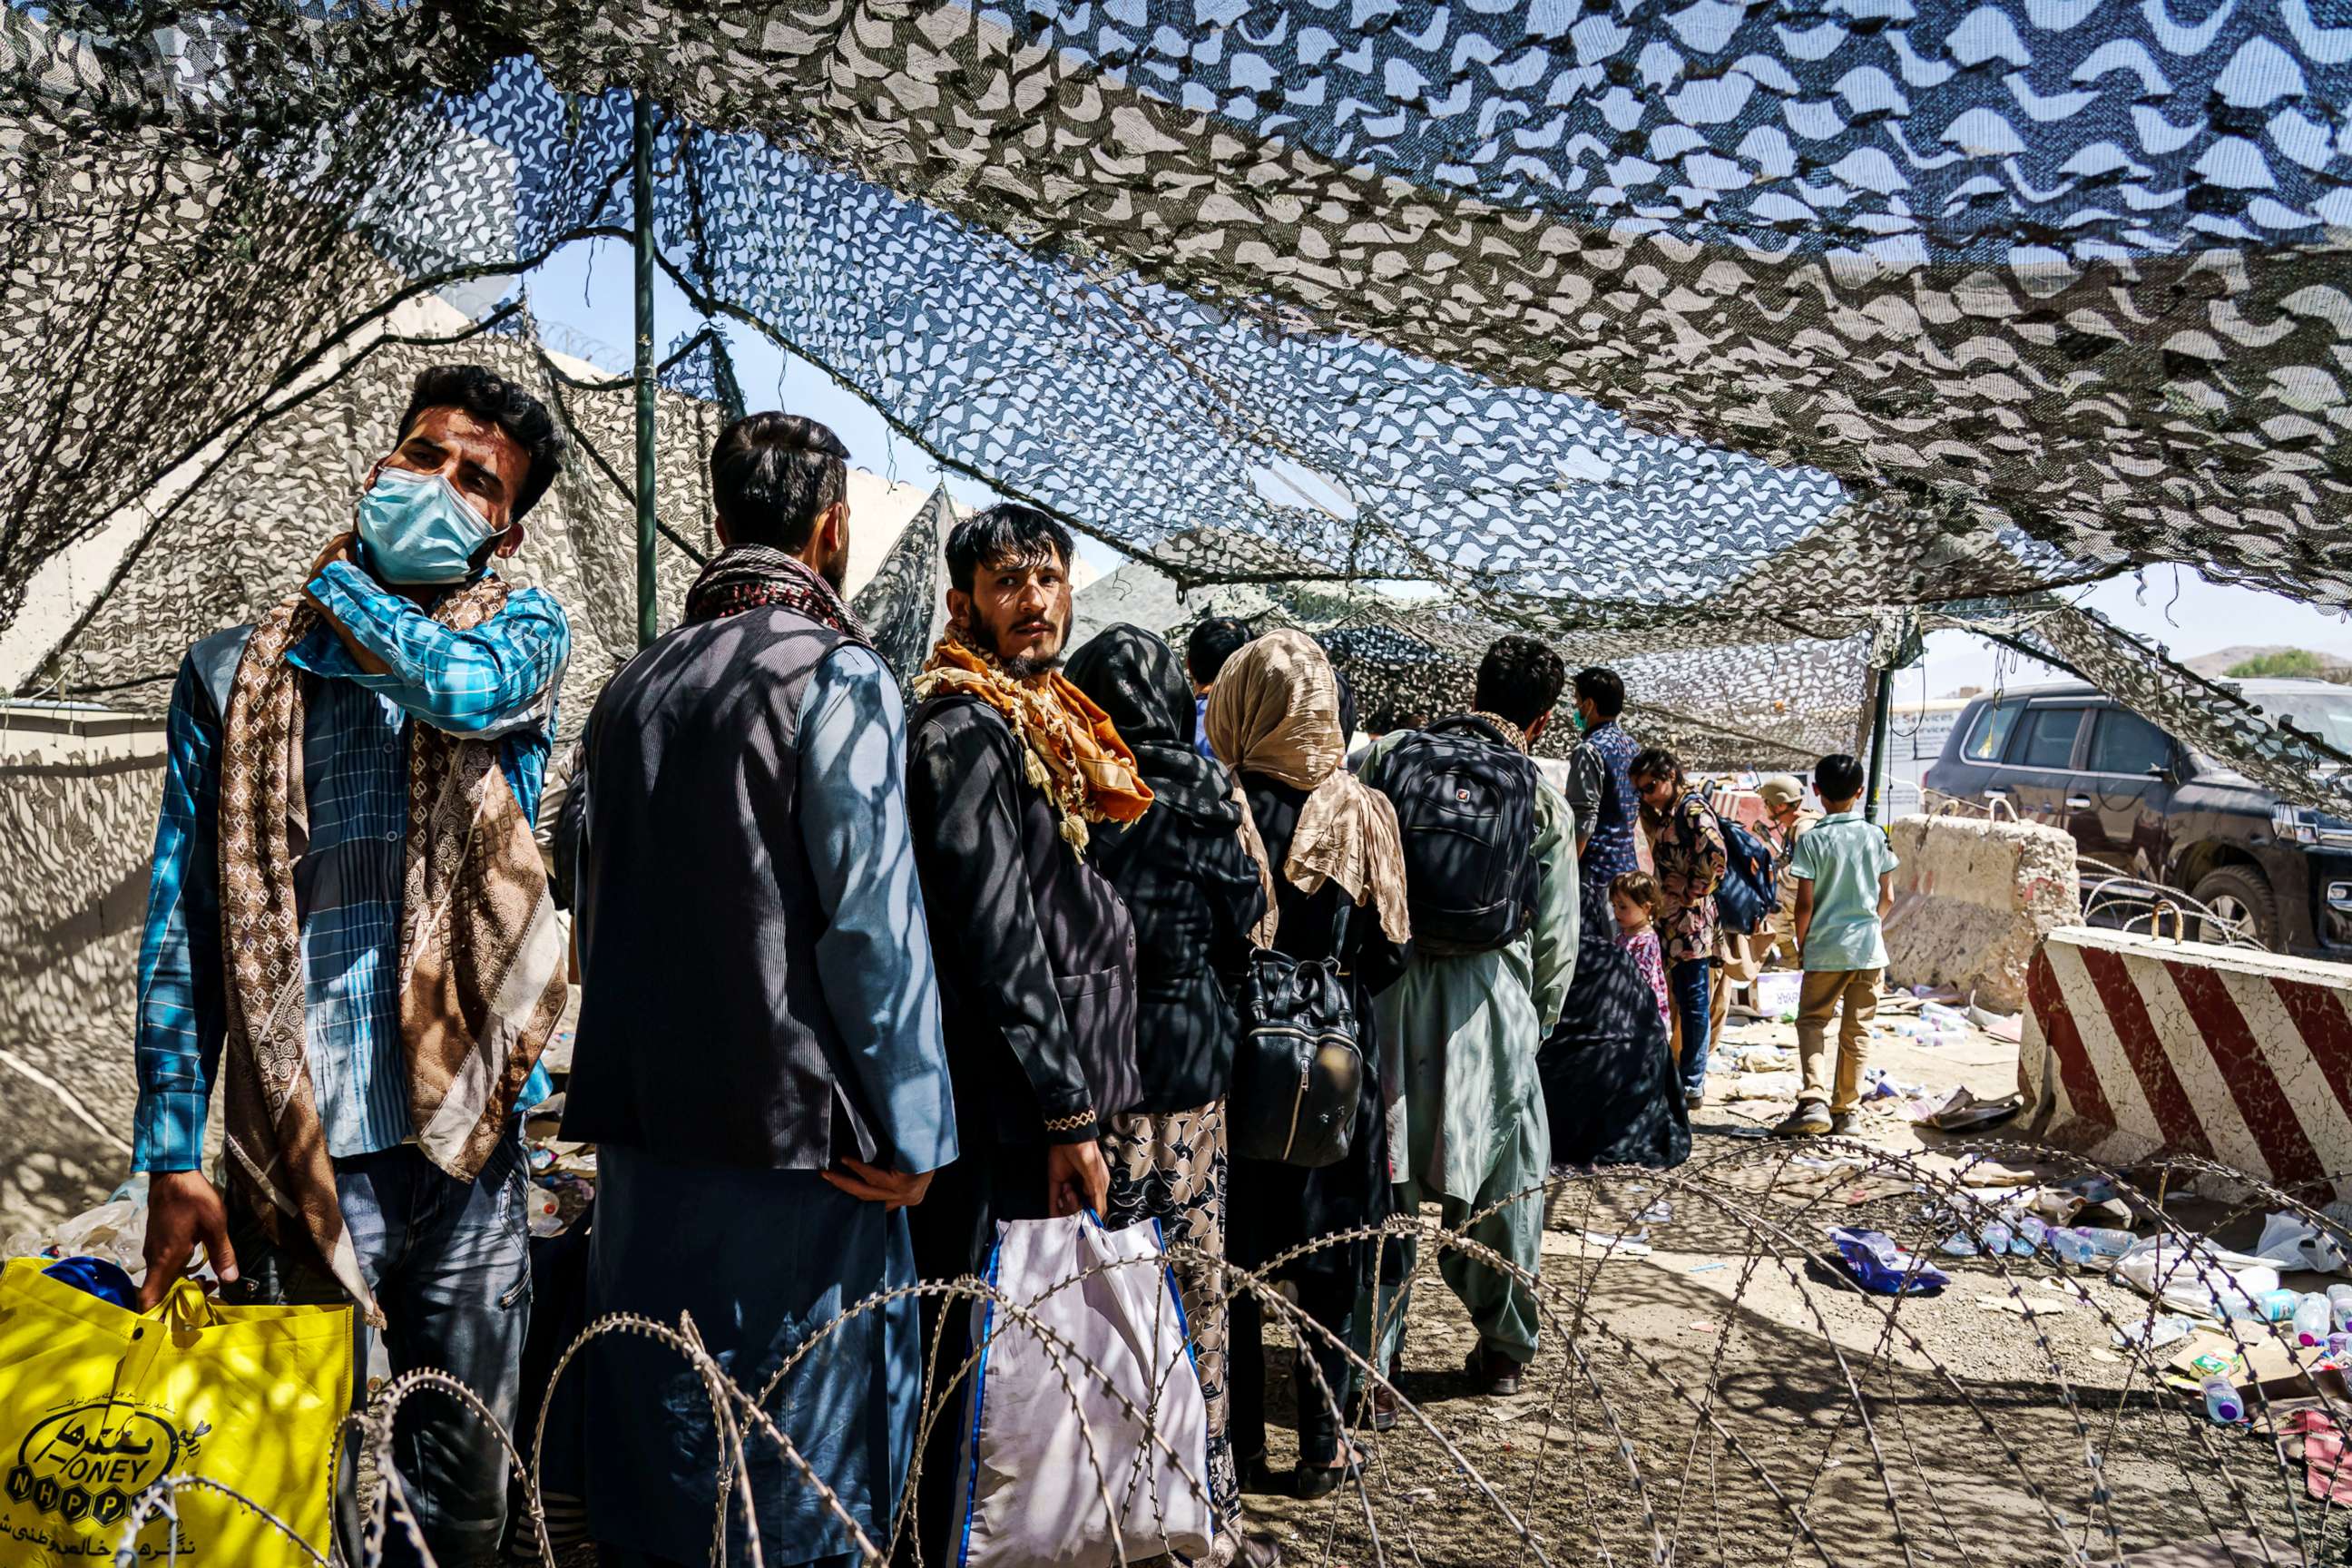 PHOTO: Afghan refugees look back towards the direction they came from as they cross through the processing area to a waiting flight out of Kabul, Afghanistan, Aug. 25, 2021.